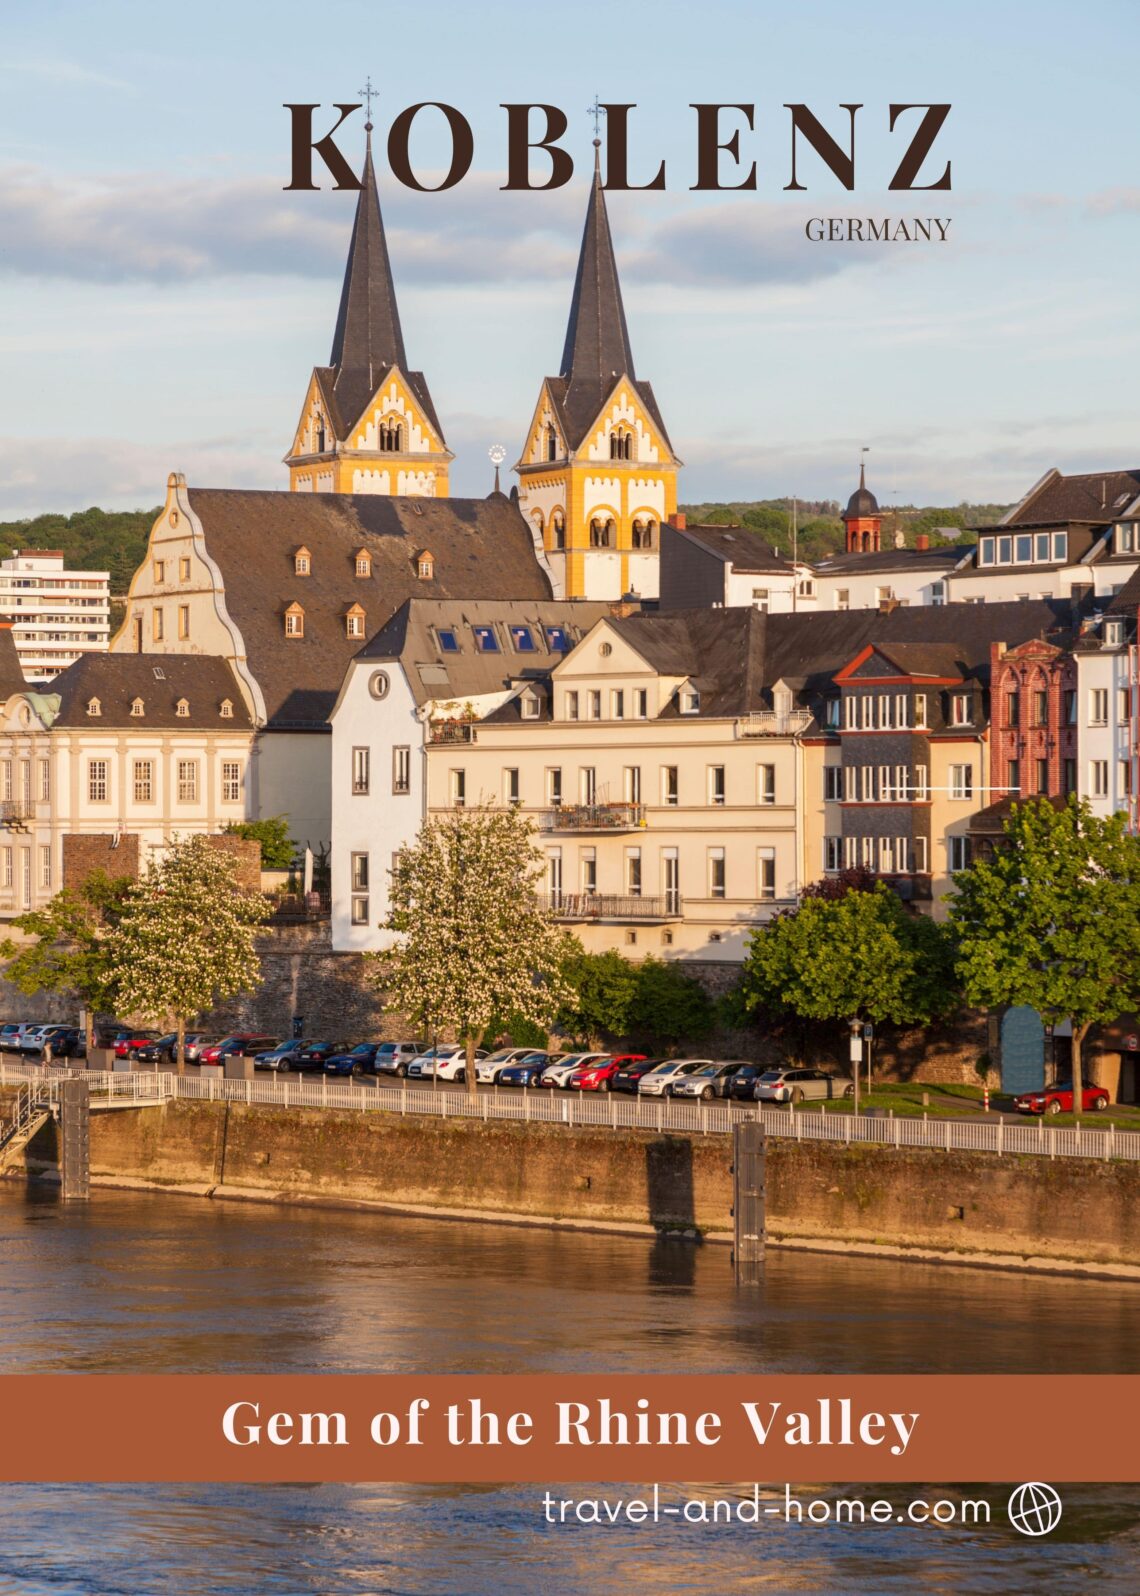 Koblenz holiday tips, travel guide, Germany, travel and home, Moselle River, Rhine Valley min